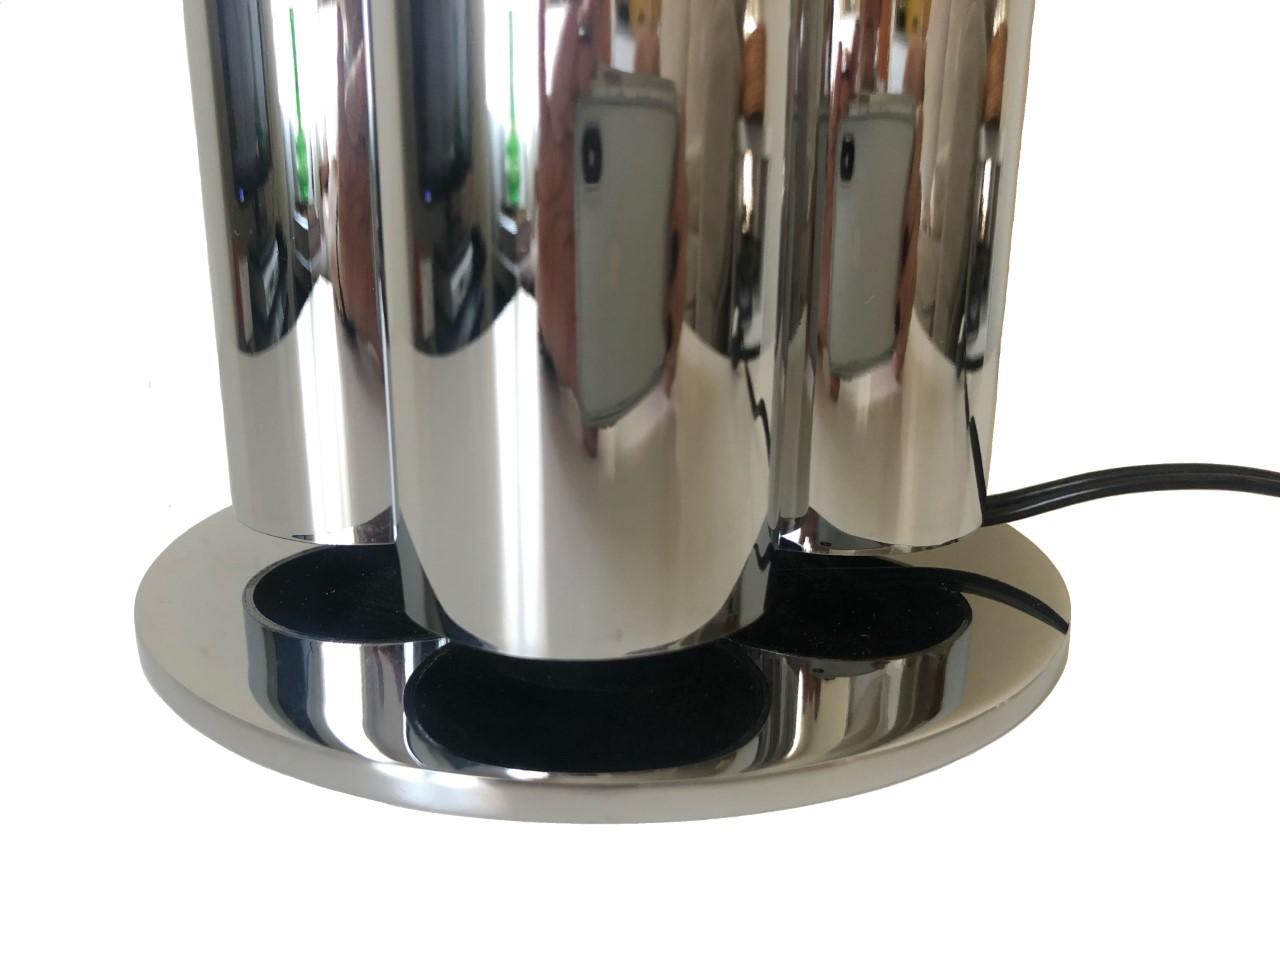 Late 20th Century Italian Midcentury Pair of Chromed Italian Table Lamps by Reggiani, 1970s For Sale